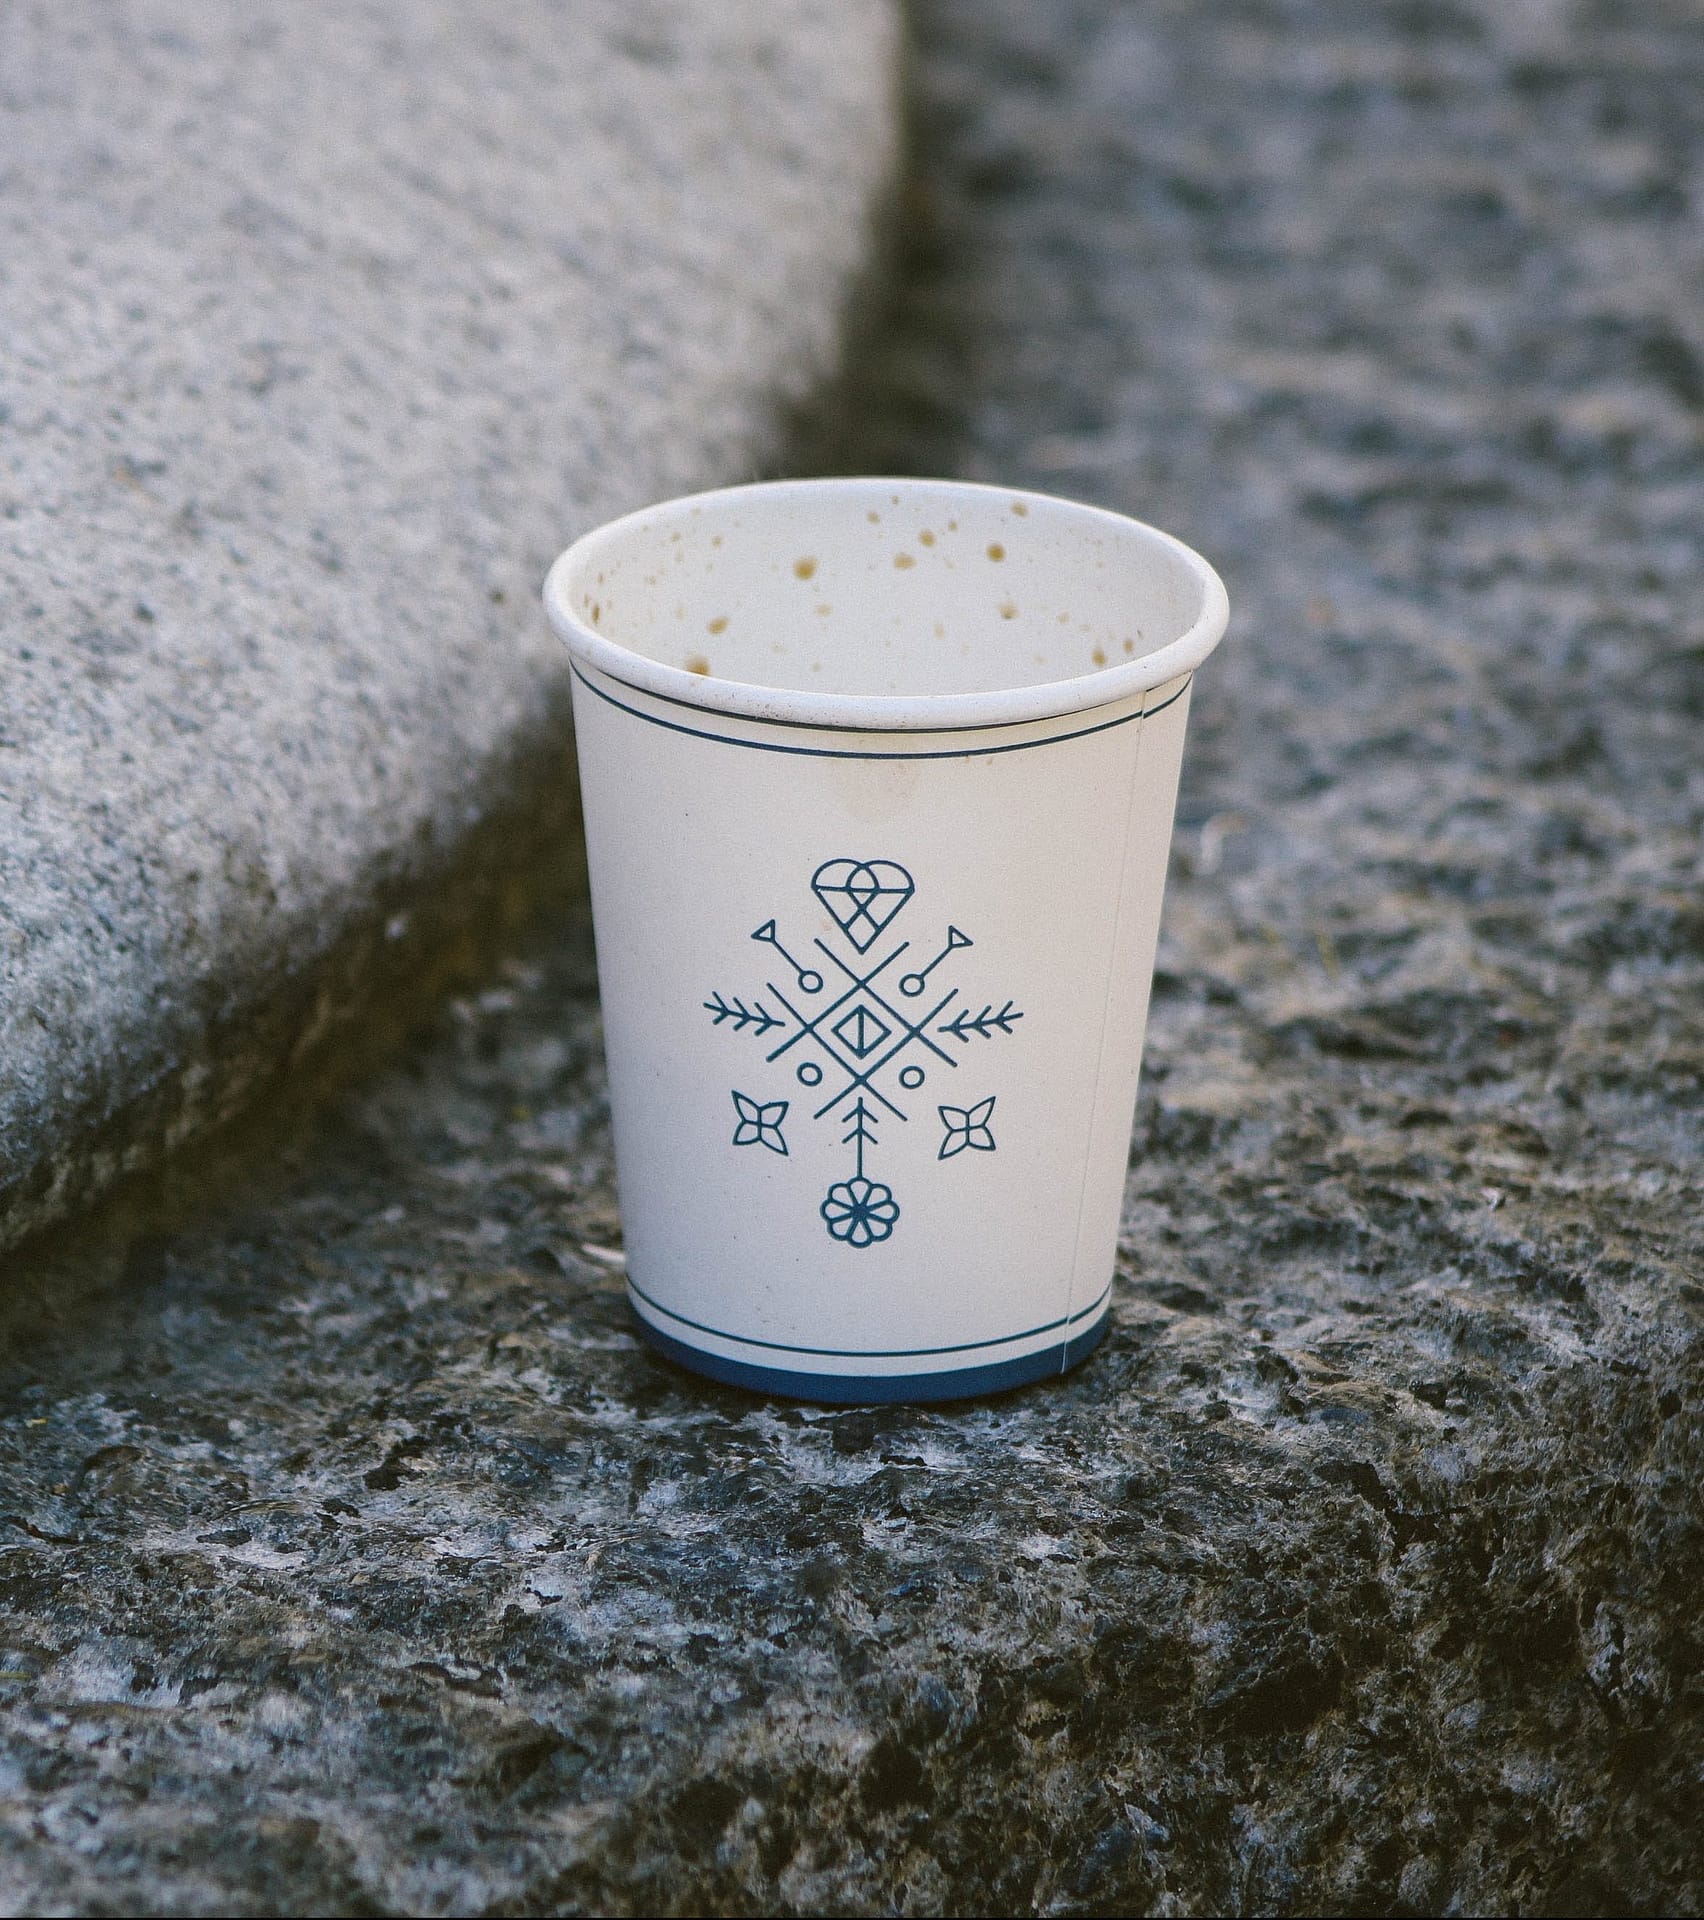 A small paper coffee cup that secretly contains plastic